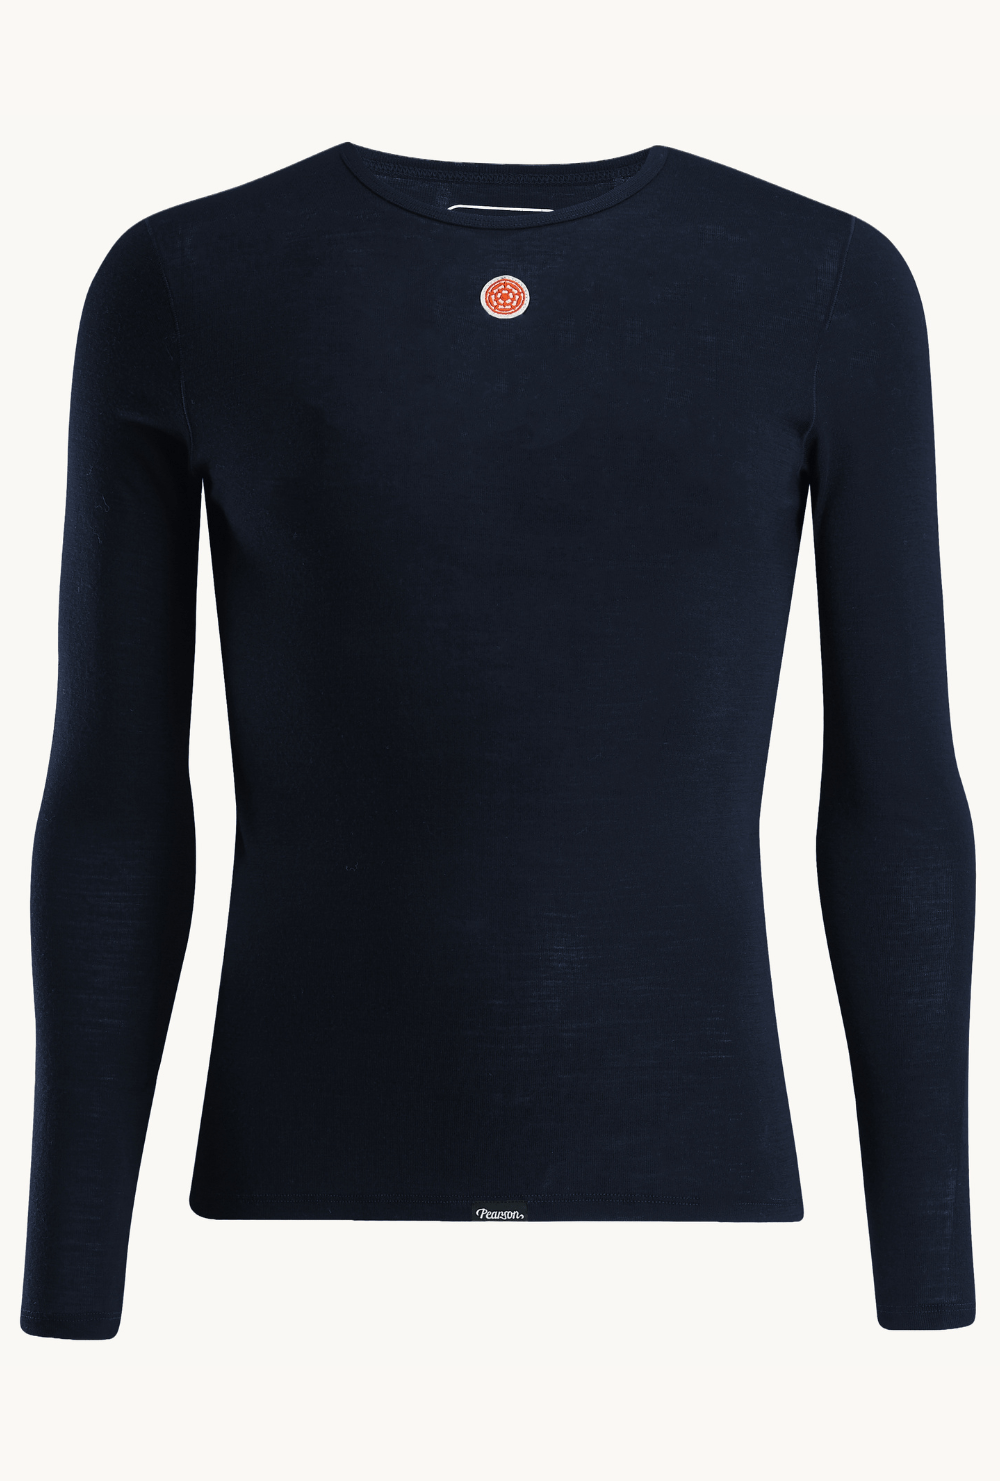 Pearson 1860  Skin In The Game - Long Sleeve Base Layer Navy Blue  Navy Blue / Xx-large